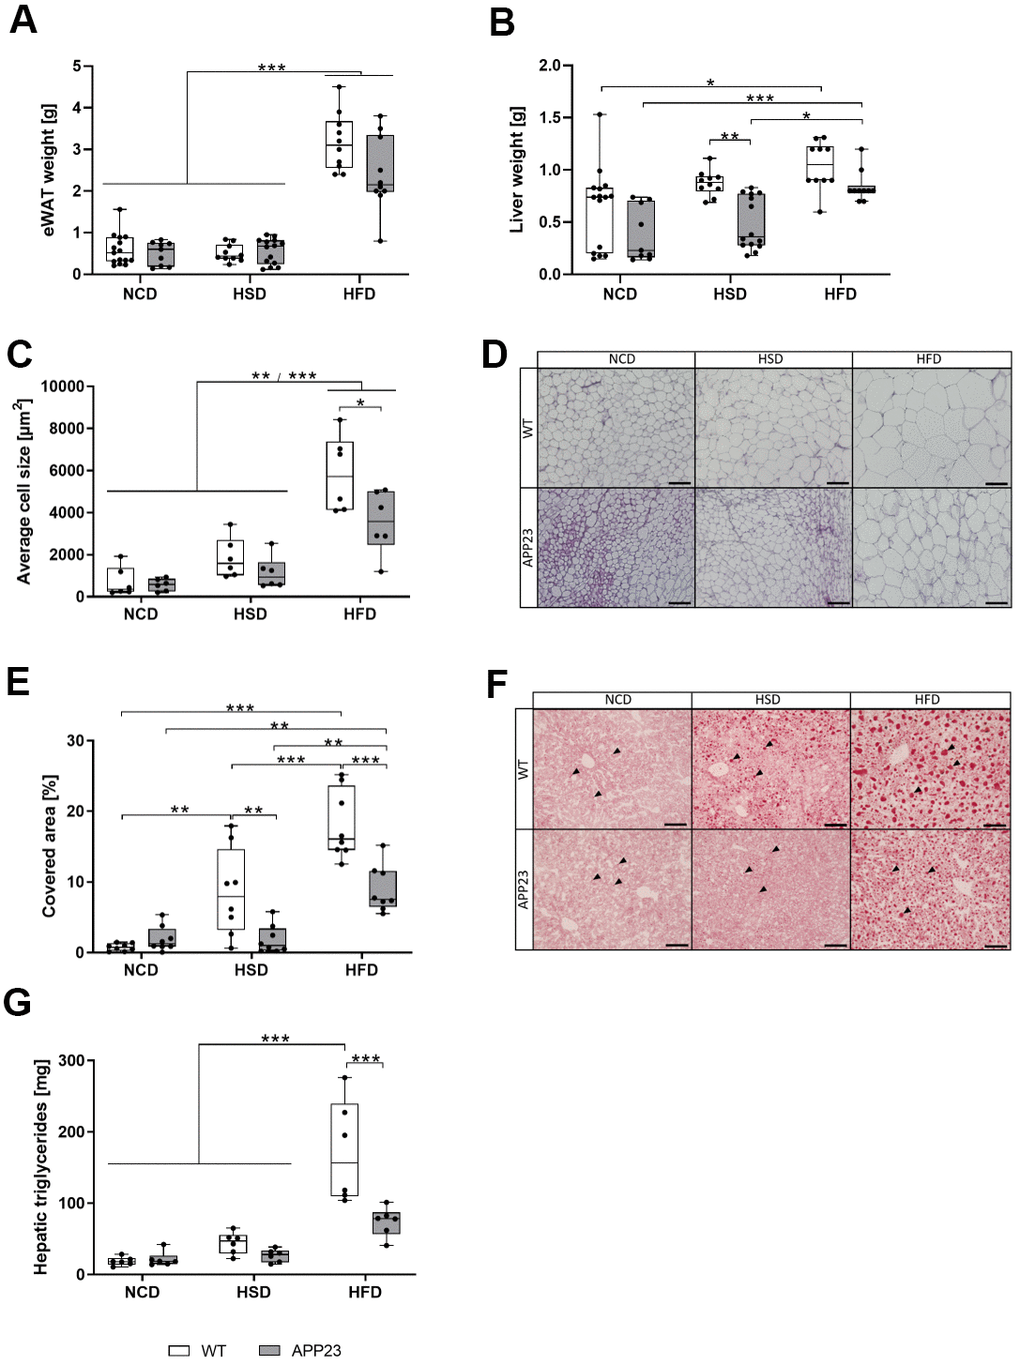 Weight of eWAT and liver, histological analysis of adipocyte size in eWAT and lipid droplets in liver tissue, and quantification of hepatic triglycerides. Weight of eWAT (A) and liver (B) upon sacrifice of mice after 20 weeks of dietary interventions (NCD, HSD or HFD). (C) Quantification of mean adipocyte size in eWAT sections analyzed with ImageJ (D) Representative hematoxylin/eosin stainings of eWAT tissue. Scale bar: 100 μm (E) Lipid quantification of Oil Red O-stained hepatic sections analyzed with ImageJ. (F) Representative Oil Red O stainings of liver tissue. Arrowheads point to individual Oil Red O-stained lipid droplets. Scale bar: 100 μm. (G) Quantification of hepatic triglycerides. Measured triglyceride concentrations were multiplied by liver weight to obtain absolute amounts of triglycerides. Data are represented as box (25th to 75th percentile) with median and whiskers from minimum to maximum. Black asterisks indicate significant differences between groups (*: pA, B) and Tukey post-hoc test of an ordinary 2-way ANOVA (C, E, G). For (A, B) nNCD WT=15, nNCD APP23=9, nHSD WT=10, nHSD APP23=14, nHFD WT=10, nHFD APP23=10. For (C, D) n=6 each. For (E, F) n=8 each, For (G) n=6 each.